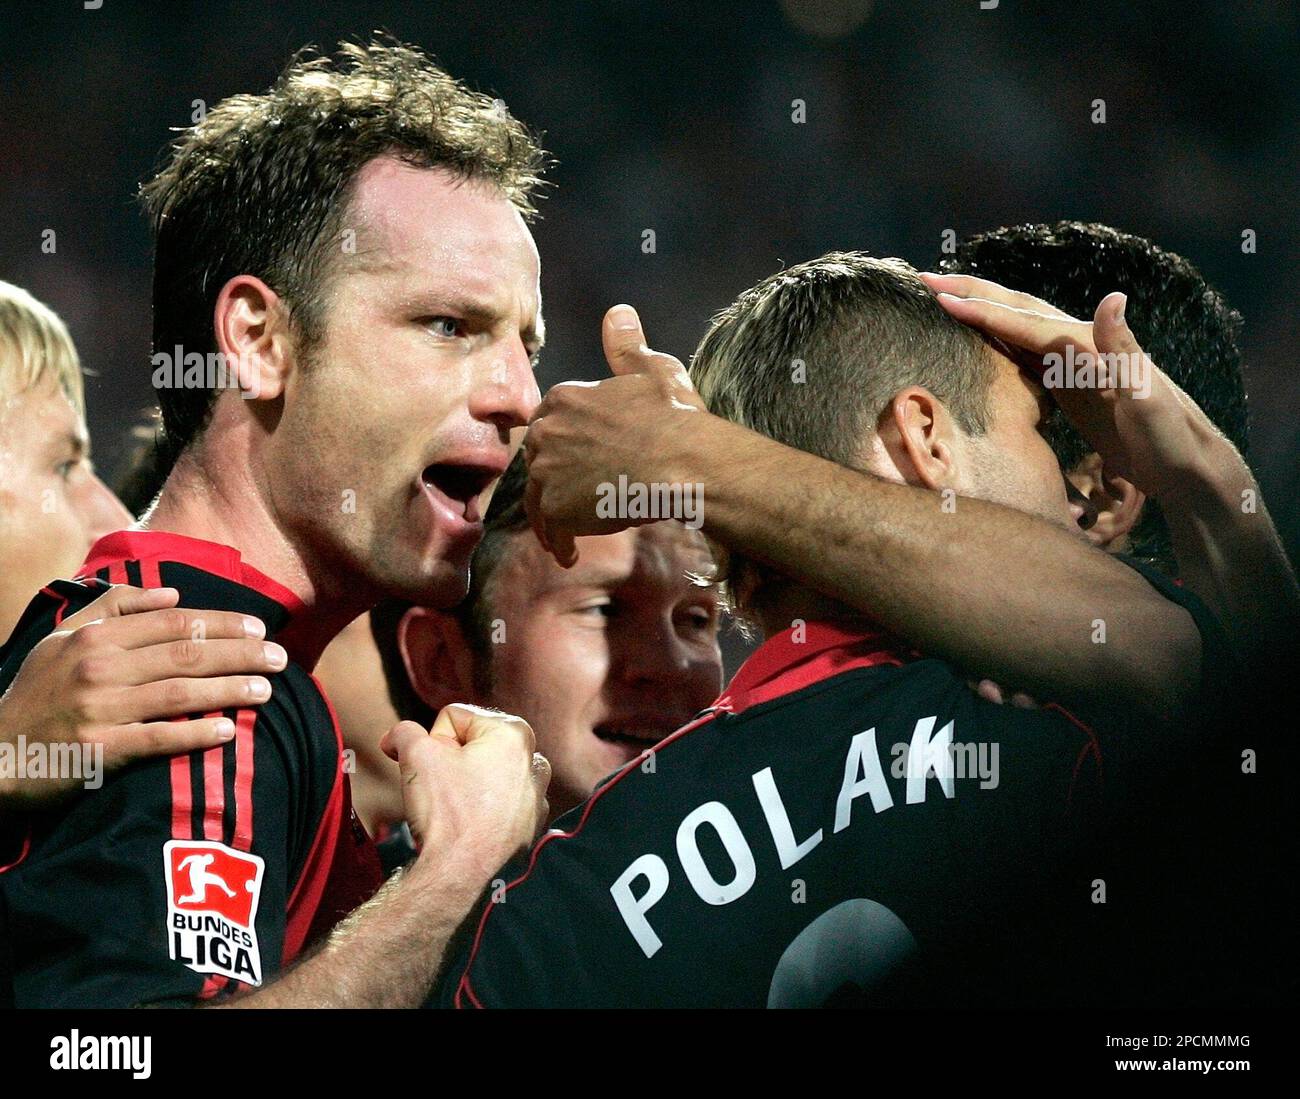 Nuremberg's Markus Schroth, left, celebrates with his teammates Ivan Saenko from Russia and Jan Polak from Czech Republic, from left, during the German first soccer division match between 1. FC Nuremberg and Borussia Moenchengladbach in Nuremberg's easy credit stadium, southern Germany, on Friday, Aug. 18, 2006. Nuremberg won the match 1-0. (AP Photo/Christof Stache)** NO MOBILE USE UNTIL 2 HOURS AFTER THE MATCH, WEBSITE USERS ARE OBLIGED TO COMPLY WITH DFL-RESTRICTIONS, SEE INSTRUCTIONS FOR DETAILS ** Stock Photo